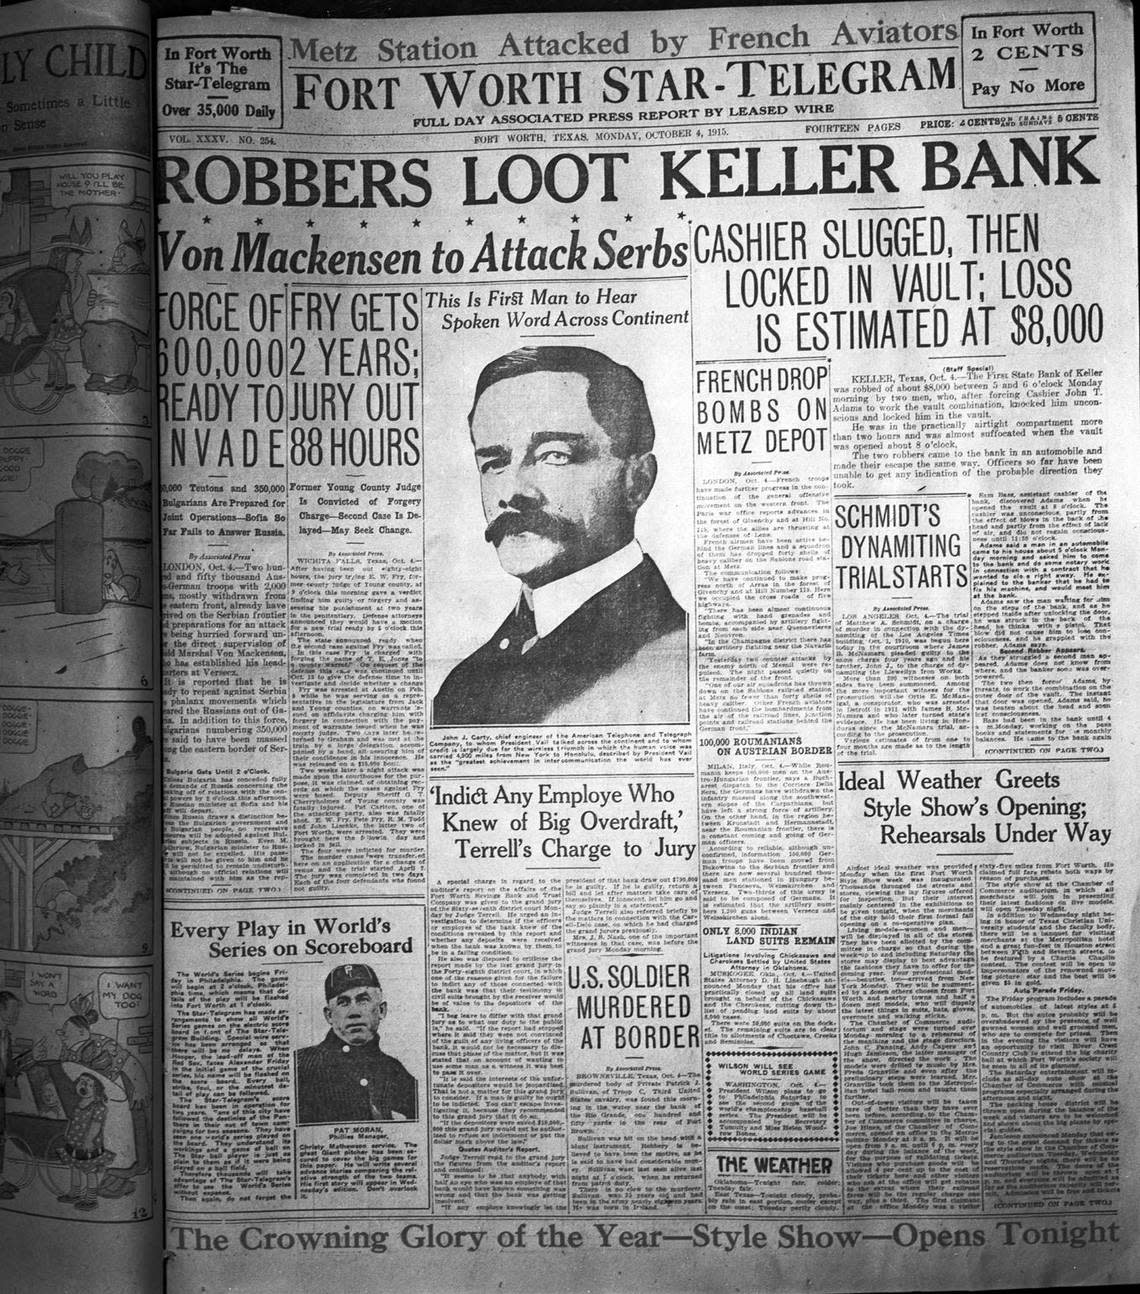 Oct. 4, 1915: Keller bank robbery article from the front page of the Fort Worth Star-Telegram. Fort Worth Star-Telegram archive/UT Arlington Special Collections